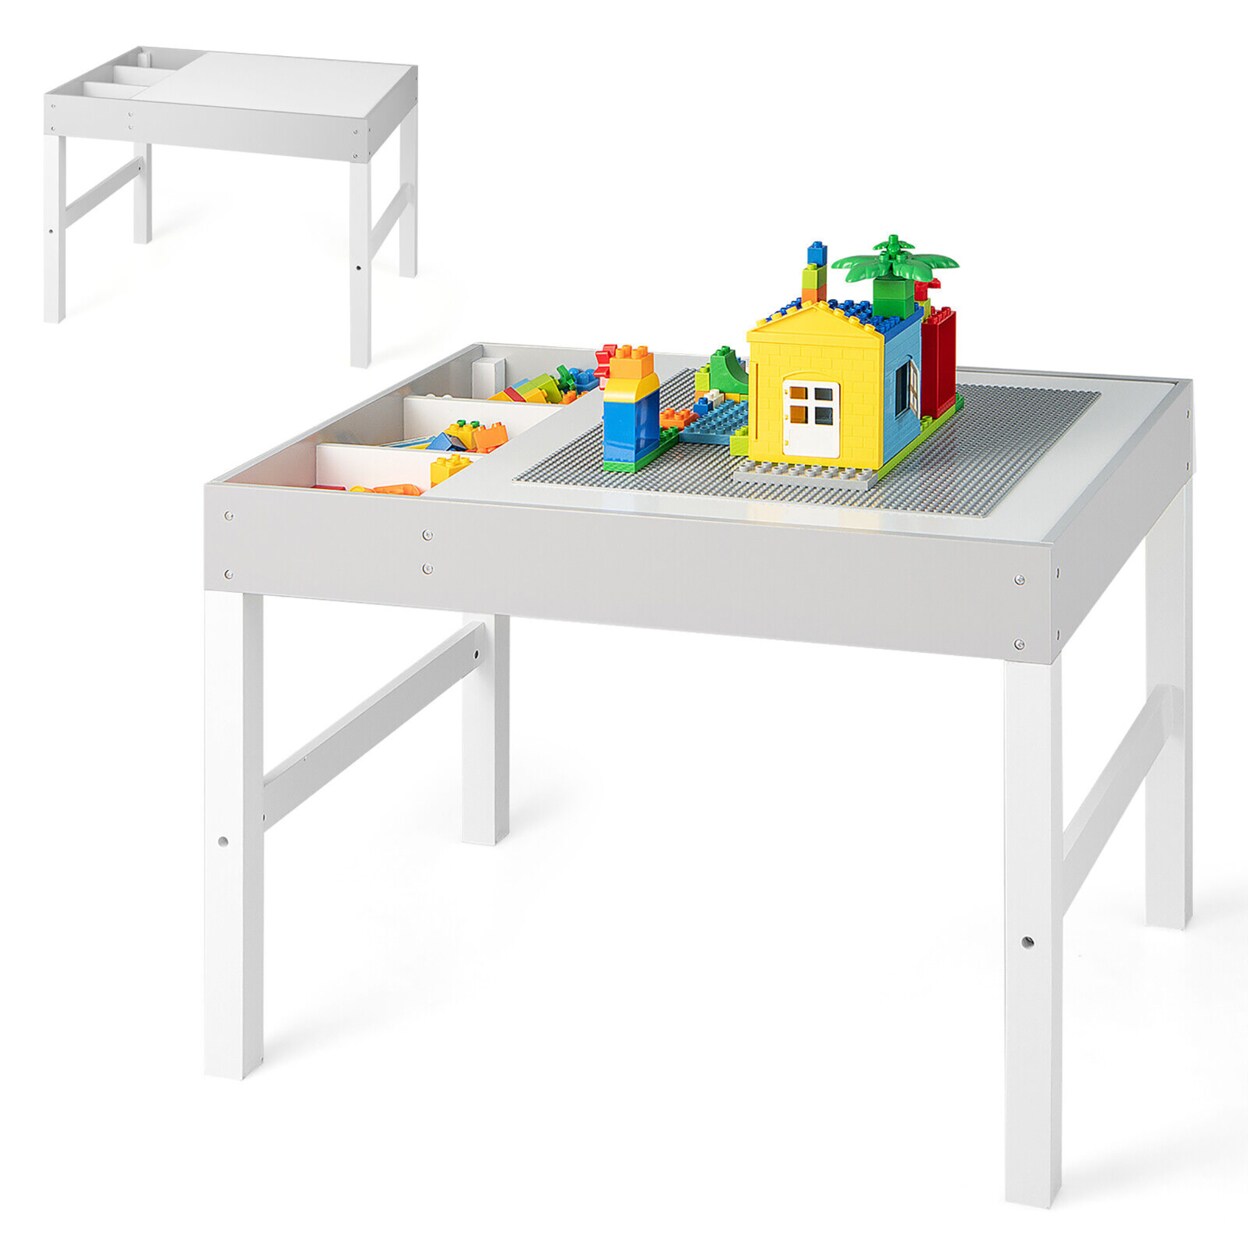 Gymax Kids Multi Activity Play Table 3 in 1 Wooden Building Block Desk w/ Storage Gift